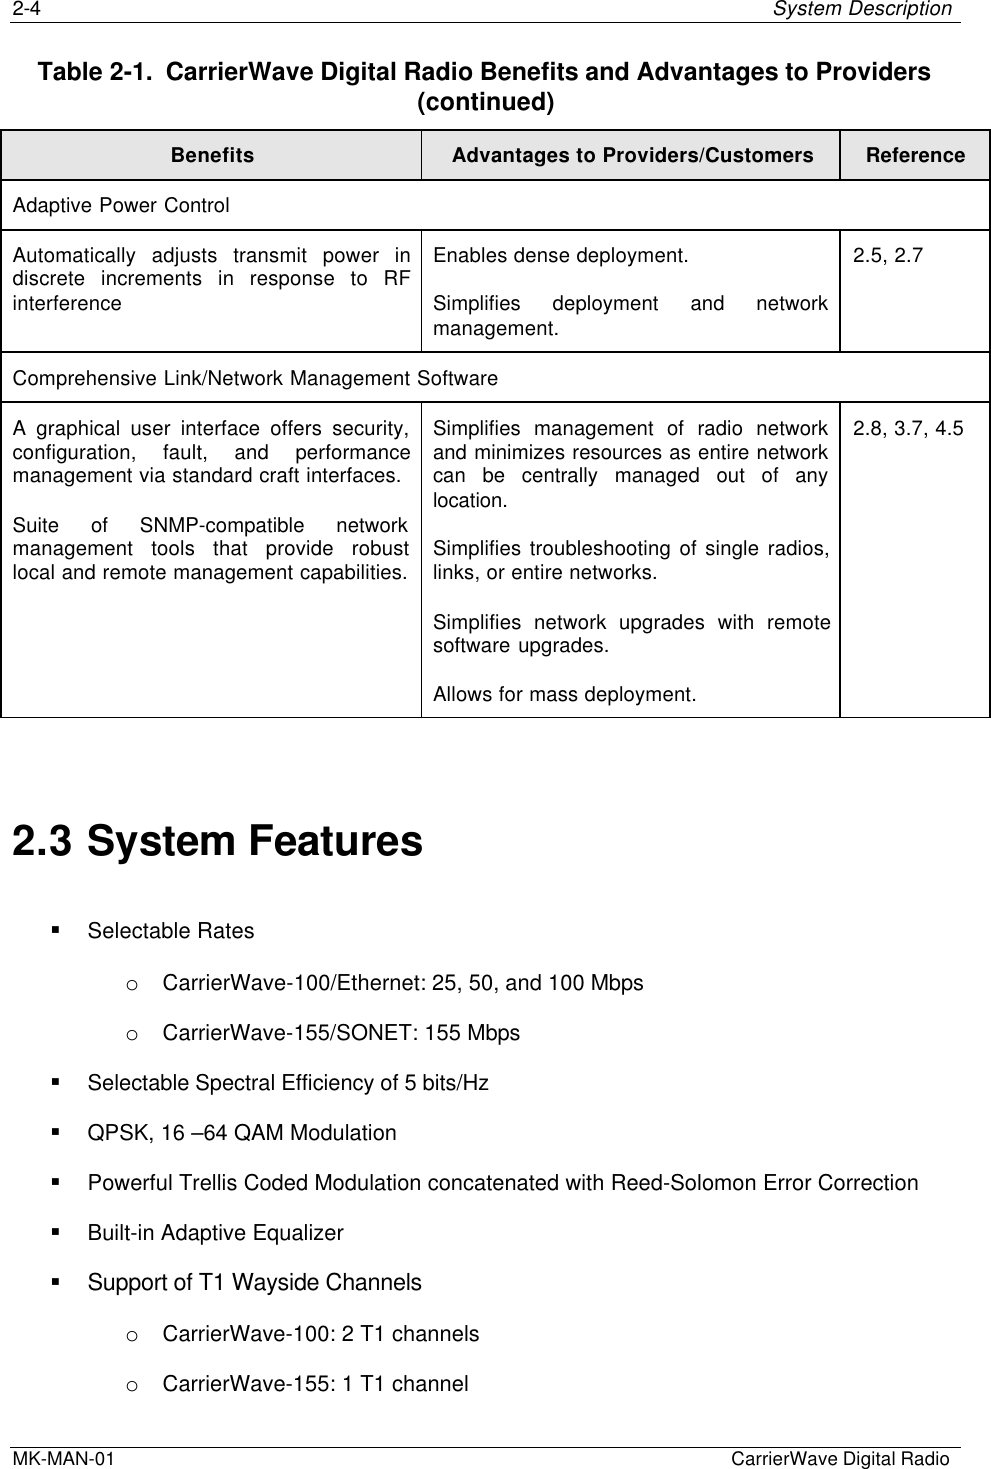 2-4 System DescriptionMK-MAN-01  CarrierWave Digital RadioTable 2-1.  CarrierWave Digital Radio Benefits and Advantages to Providers(continued)Benefits Advantages to Providers/Customers ReferenceAdaptive Power ControlAutomatically adjusts transmit power indiscrete increments in response to RFinterferenceEnables dense deployment.Simplifies deployment and networkmanagement.2.5, 2.7Comprehensive Link/Network Management SoftwareA graphical user interface offers security,configuration, fault, and performancemanagement via standard craft interfaces.Suite of SNMP-compatible networkmanagement tools that provide robustlocal and remote management capabilities.Simplifies management of radio networkand minimizes resources as entire networkcan be centrally managed out of anylocation.Simplifies troubleshooting of single radios,links, or entire networks.Simplifies network upgrades with remotesoftware upgrades.Allows for mass deployment.2.8, 3.7, 4.52.3 System Features§ Selectable Rateso CarrierWave-100/Ethernet: 25, 50, and 100 Mbpso CarrierWave-155/SONET: 155 Mbps§ Selectable Spectral Efficiency of 5 bits/Hz§ QPSK, 16 –64 QAM Modulation§ Powerful Trellis Coded Modulation concatenated with Reed-Solomon Error Correction§ Built-in Adaptive Equalizer§ Support of T1 Wayside Channelso CarrierWave-100: 2 T1 channelso CarrierWave-155: 1 T1 channel